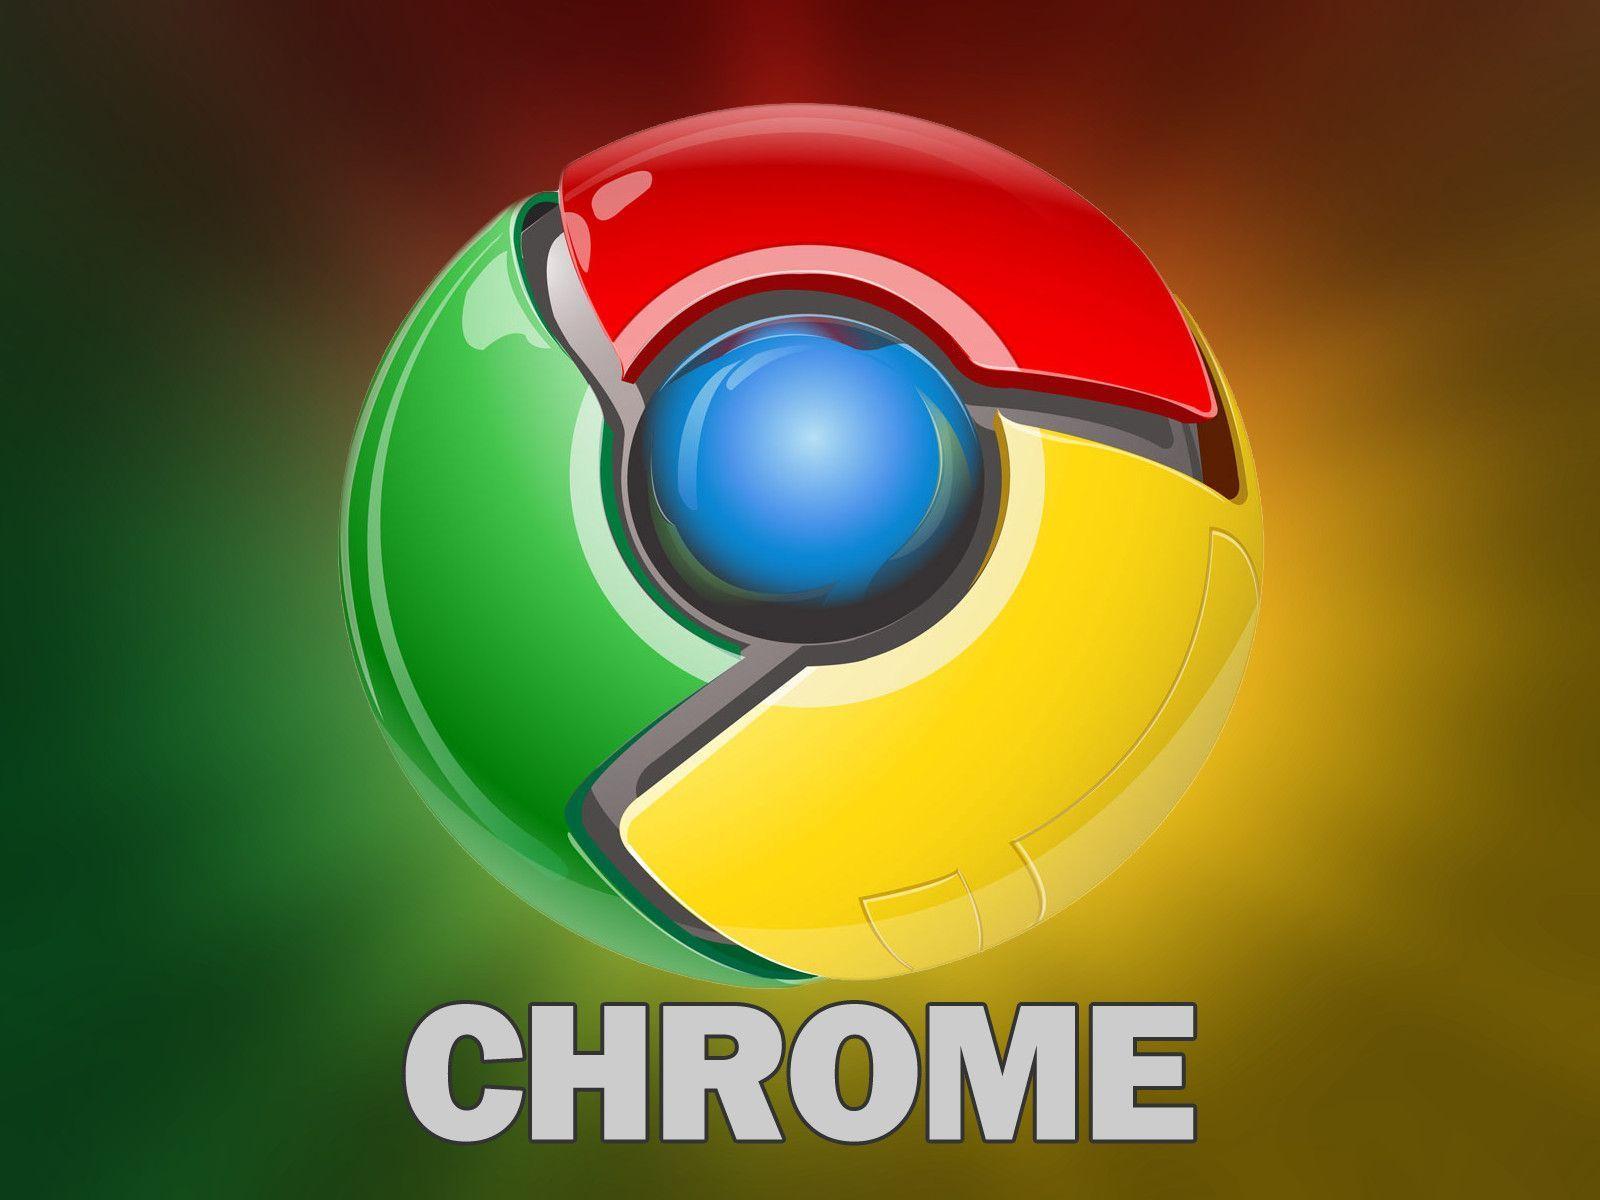 Google Chrome HD HD Wallpaper. Best Picture and Wallpaper